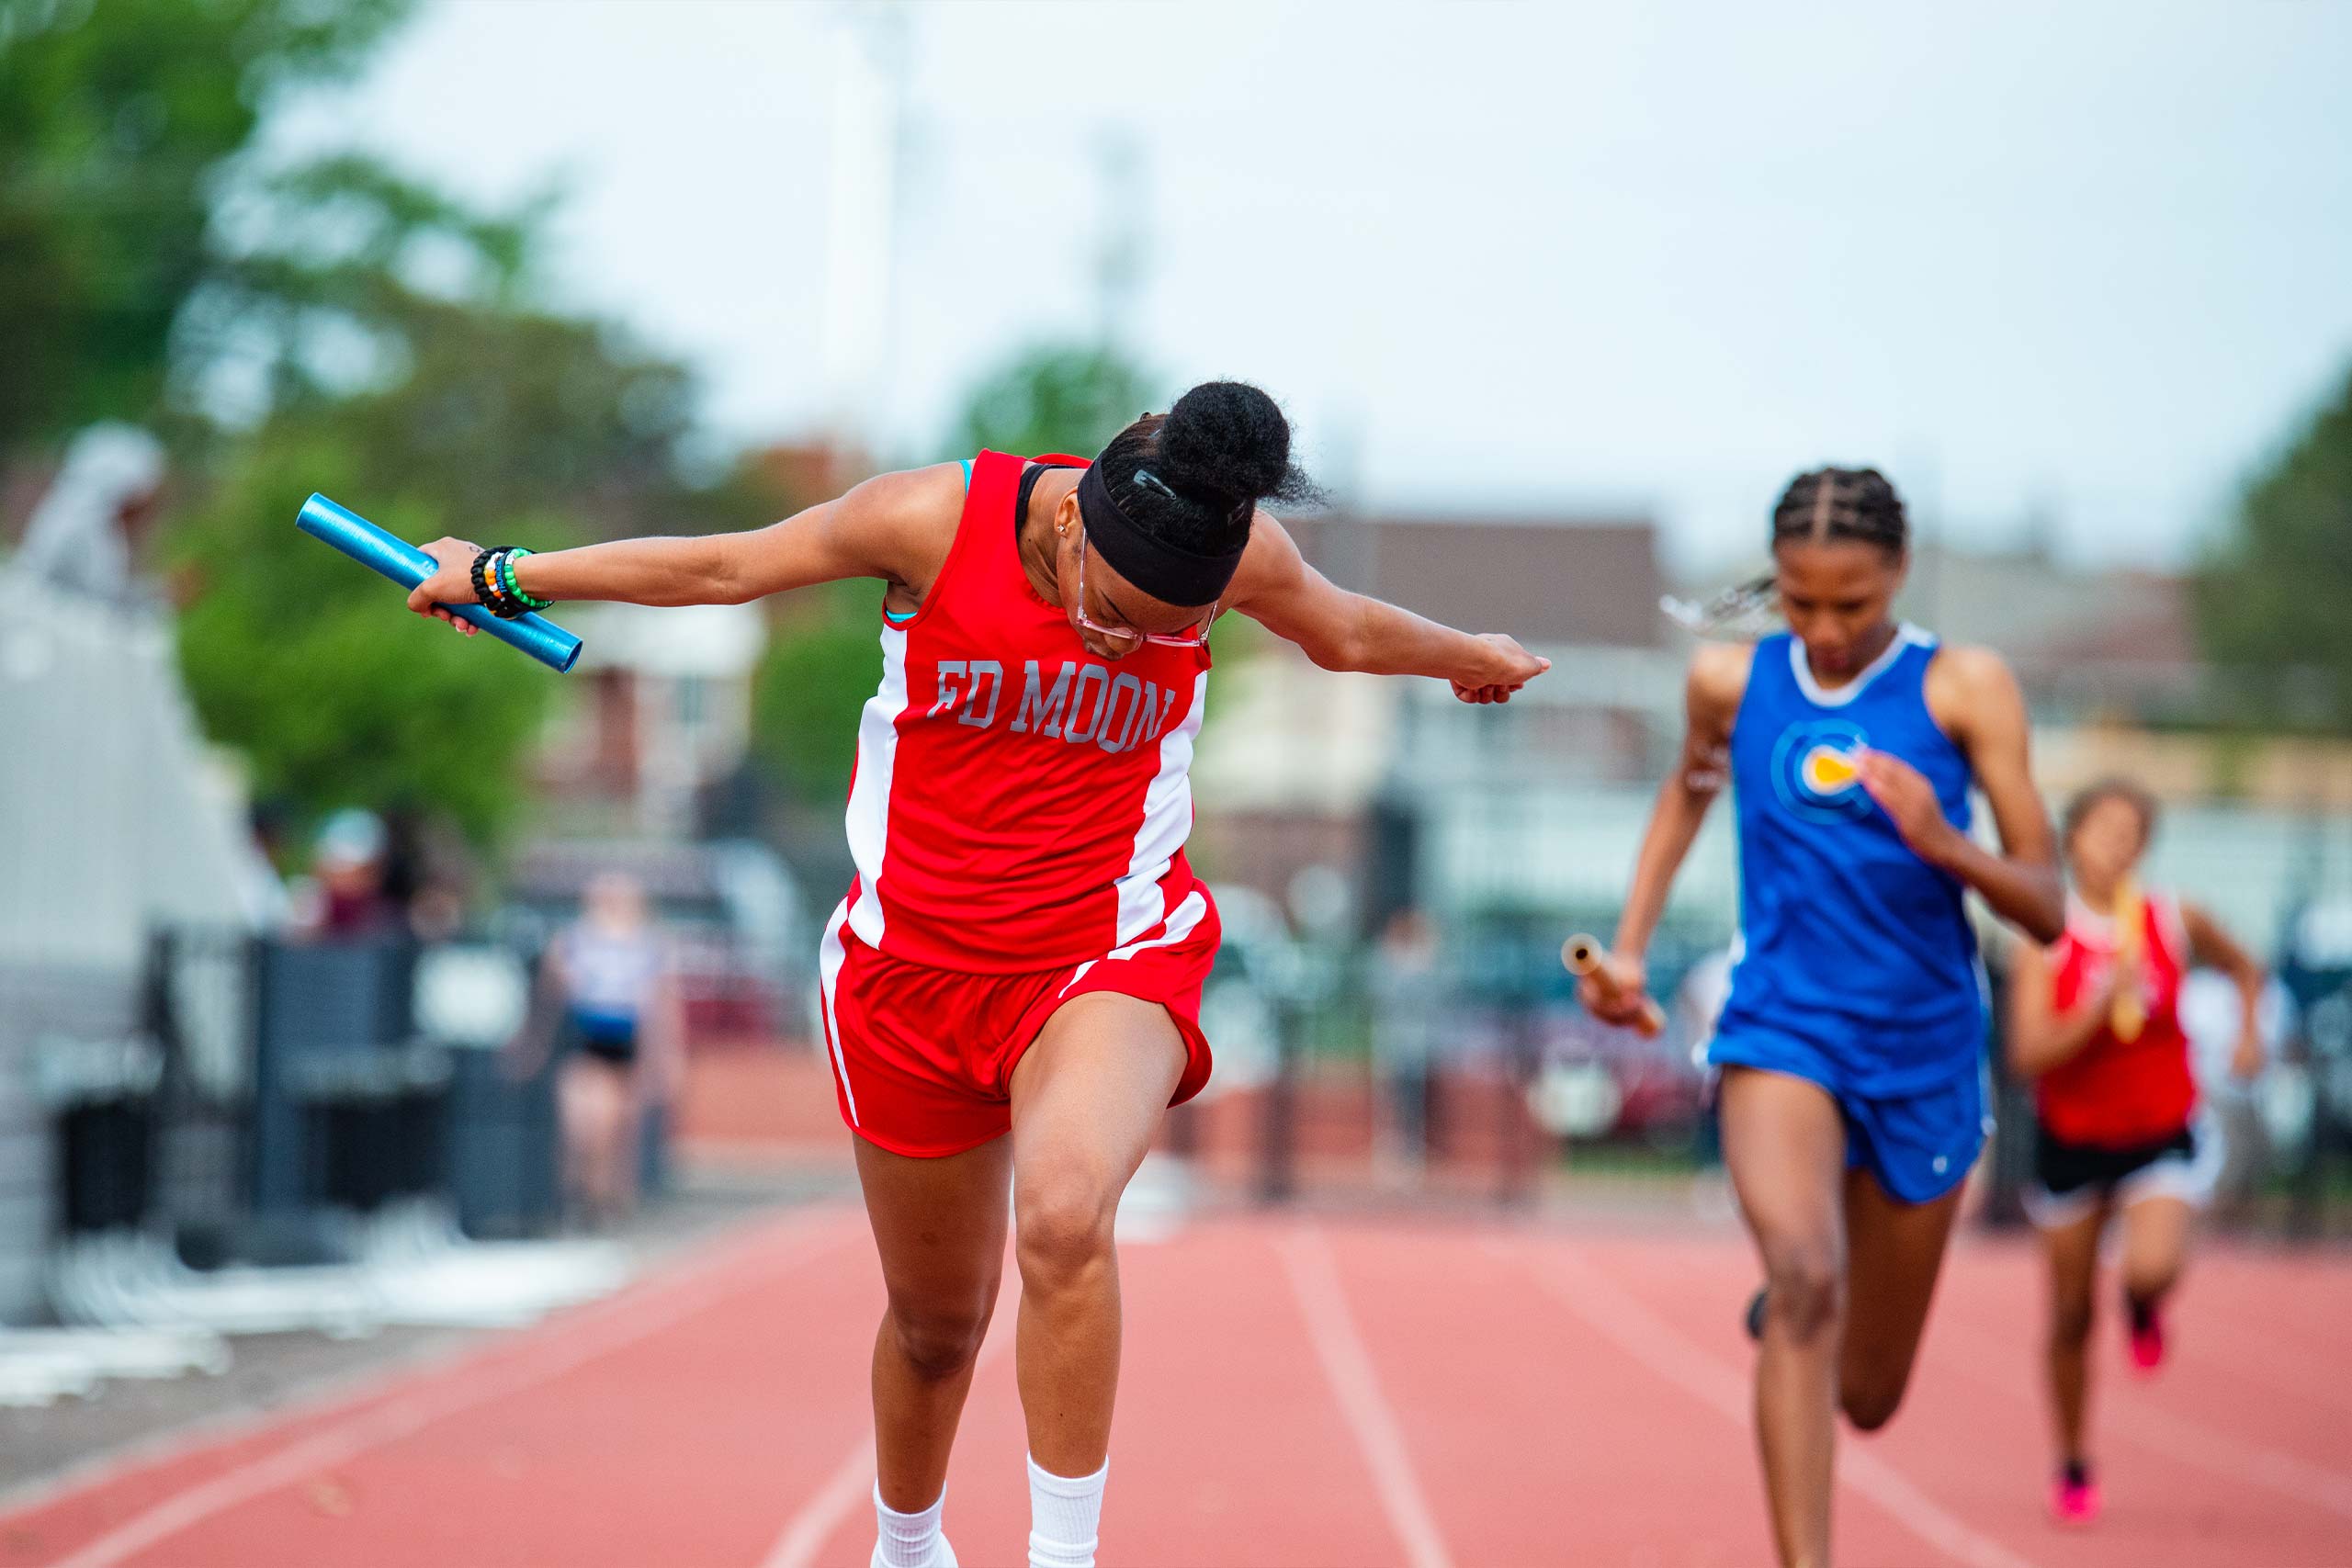 Fields & Futures Running Month ACAC MS Track Meet blog gallery image